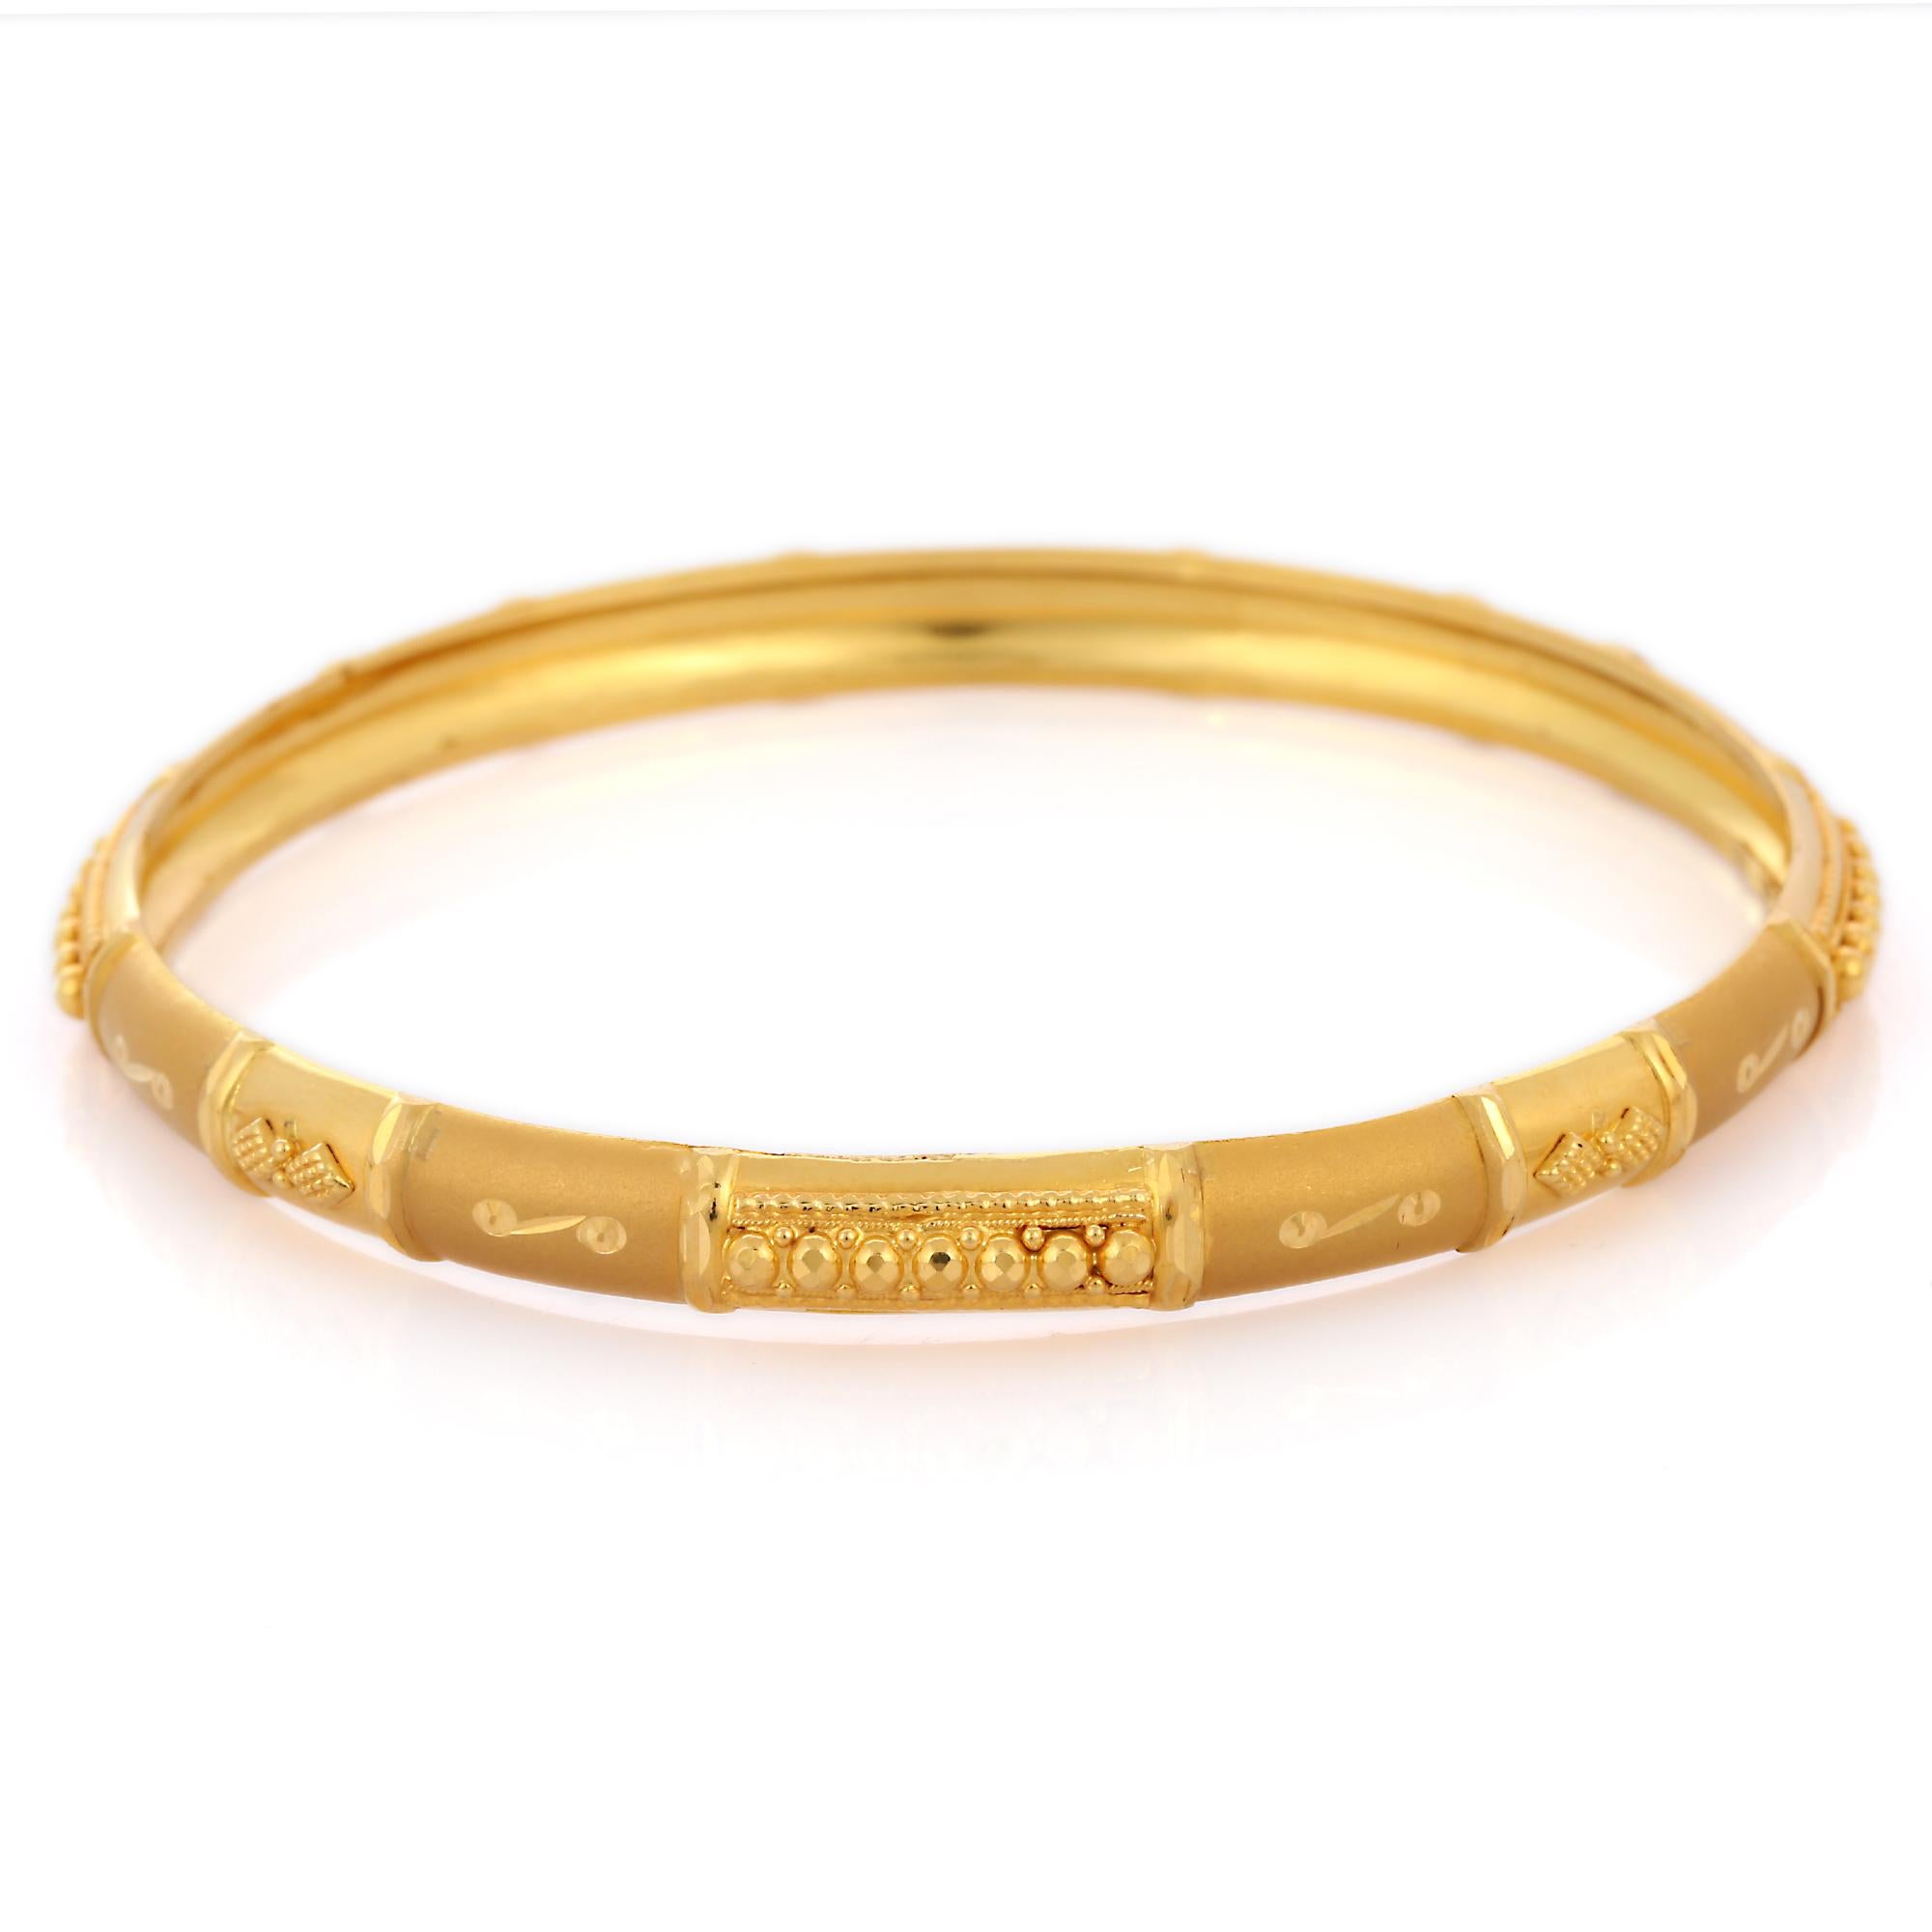 Traditional Engraved Bangle in 18K Gold. It’s a great jewelry ornament to wear on occasions and at the same time works as a wonderful gift for your loved ones. These lovely statement pieces are perfect generation jewelry to pass on.
Bangles feel